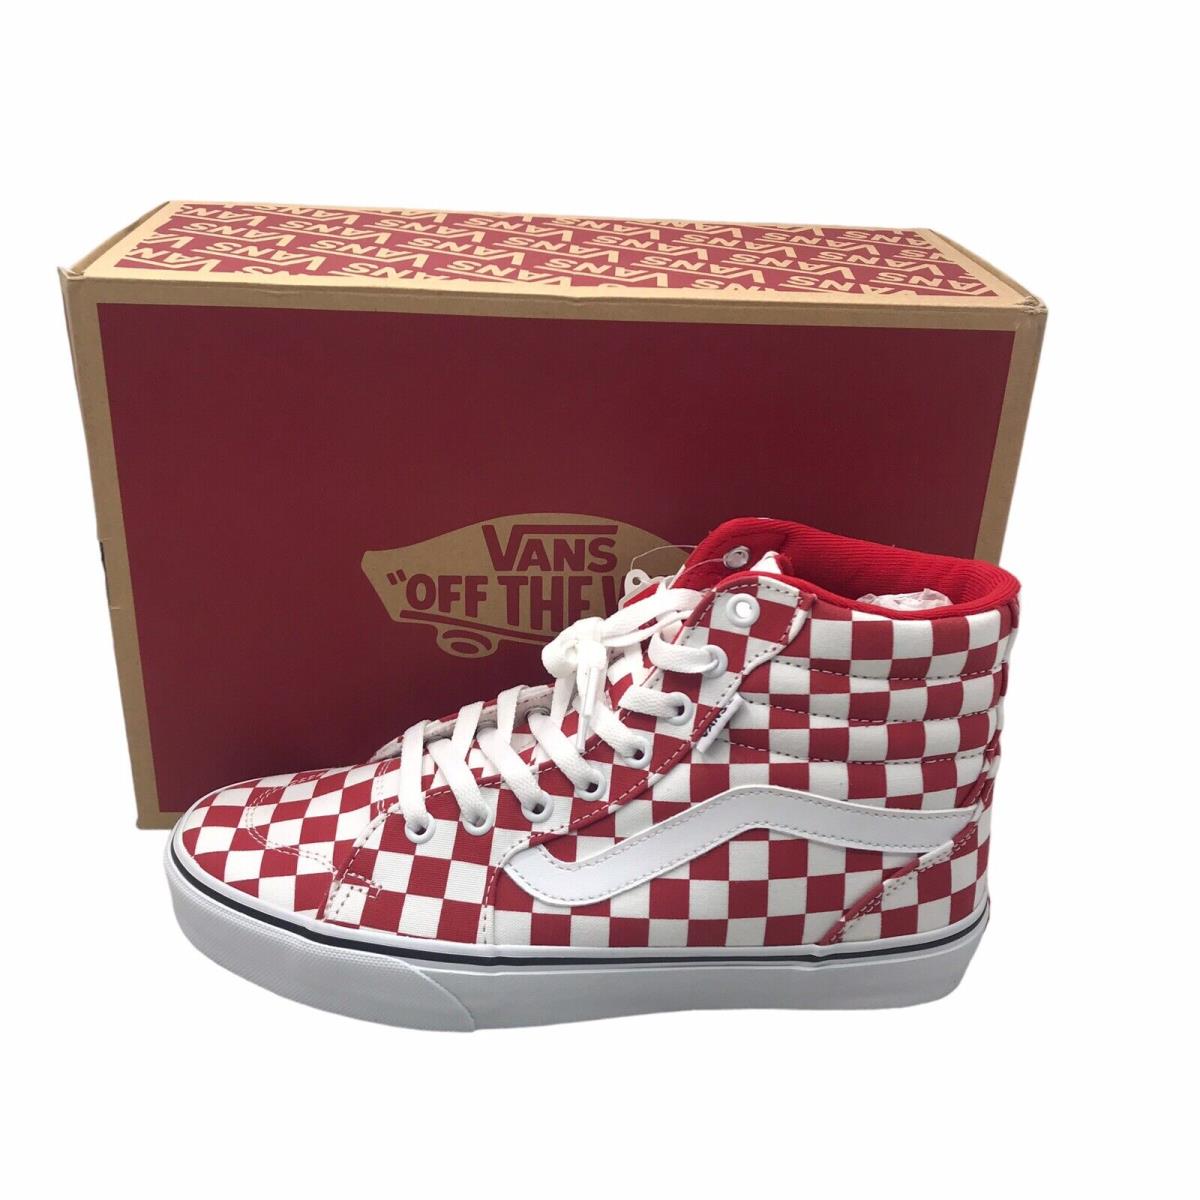 Vans Filmore Hi Top Women - Red/white Checkered - VN0A5HYURED - Size 9.5 20 - Red